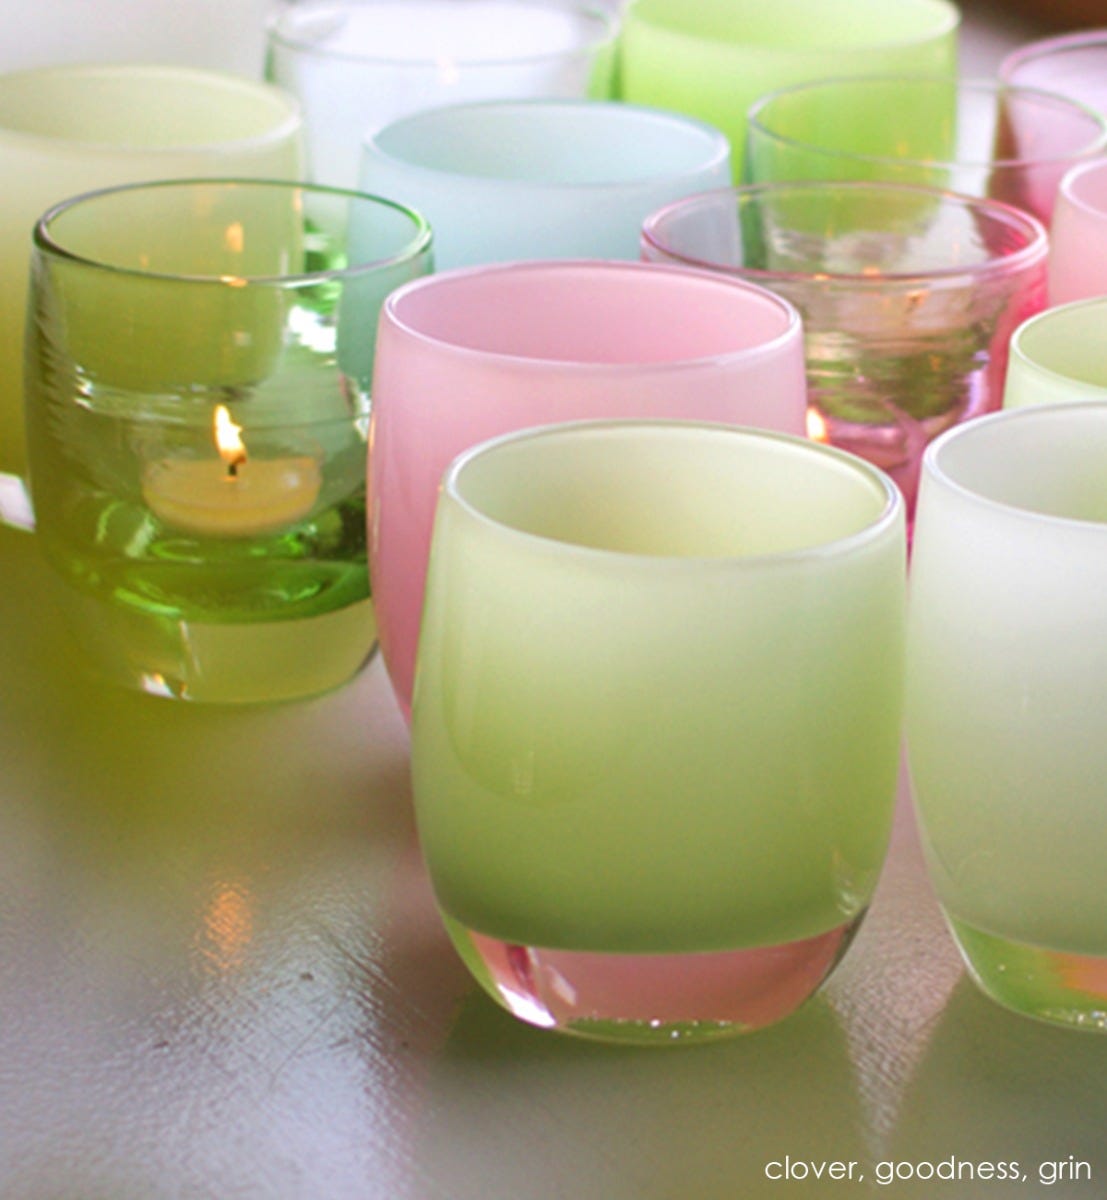 grin soft light green hand-blown glass votive candle holder. Paired with clover and goodness.